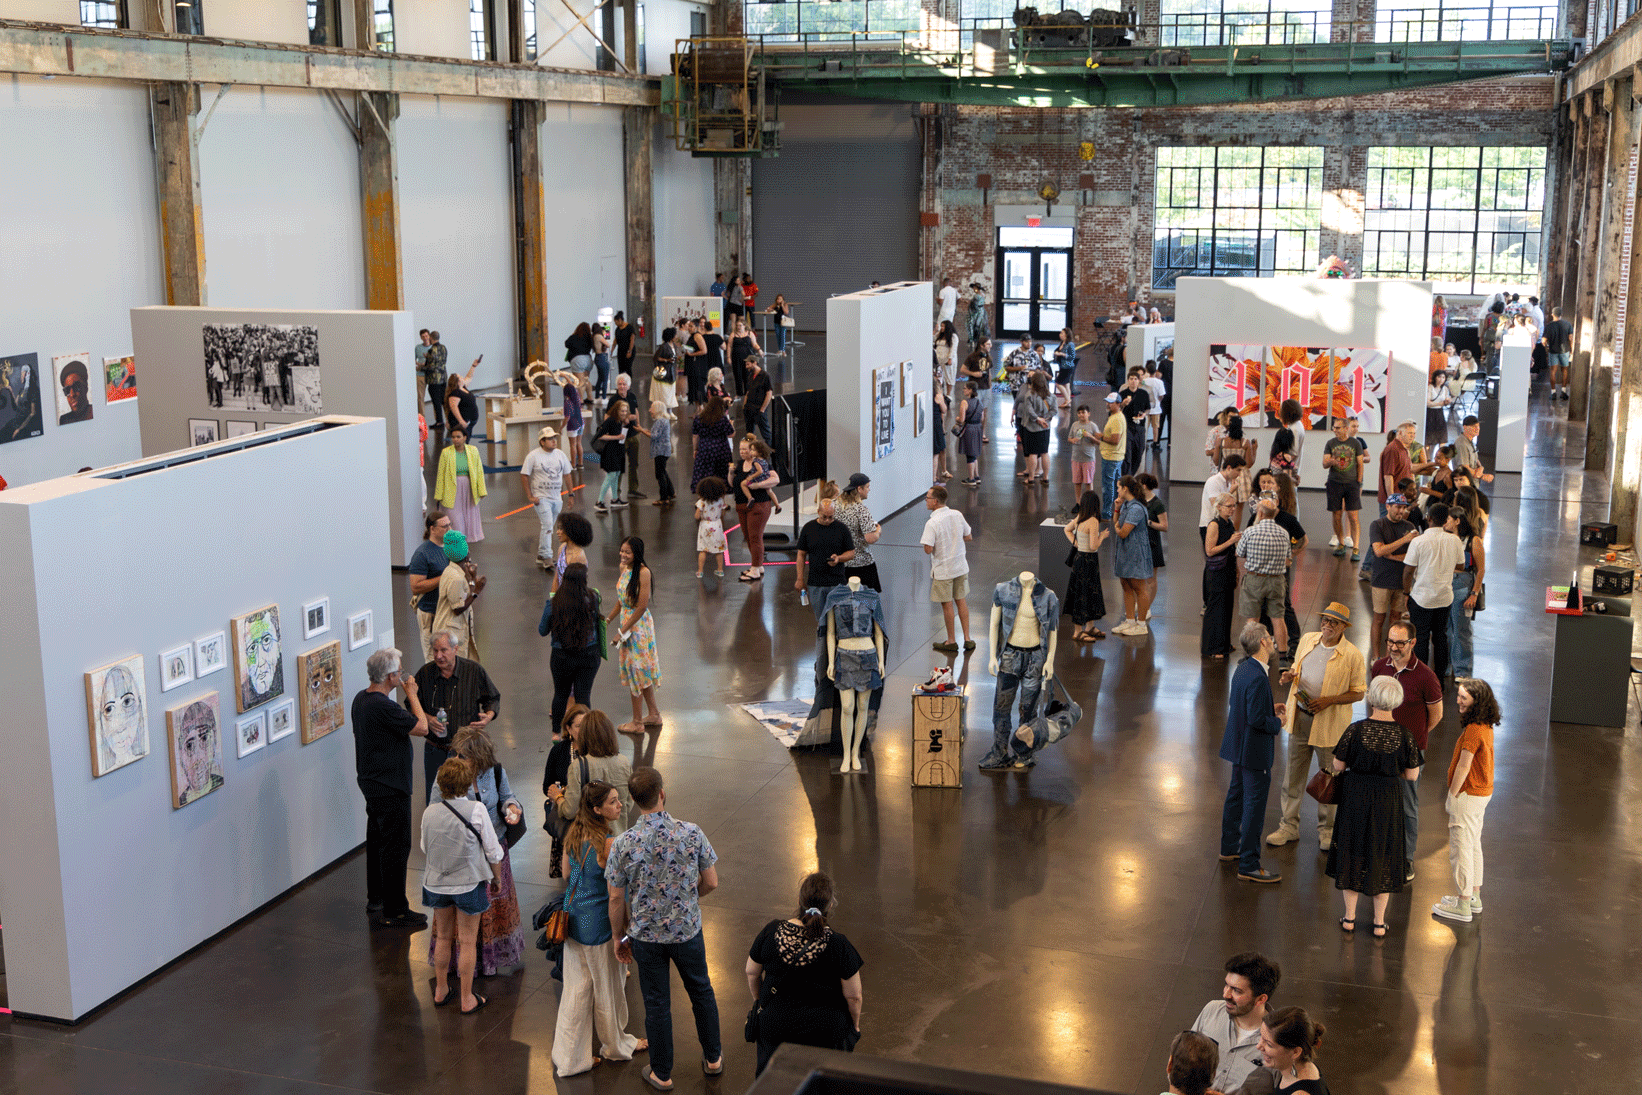 A crowd in an exhibition hall